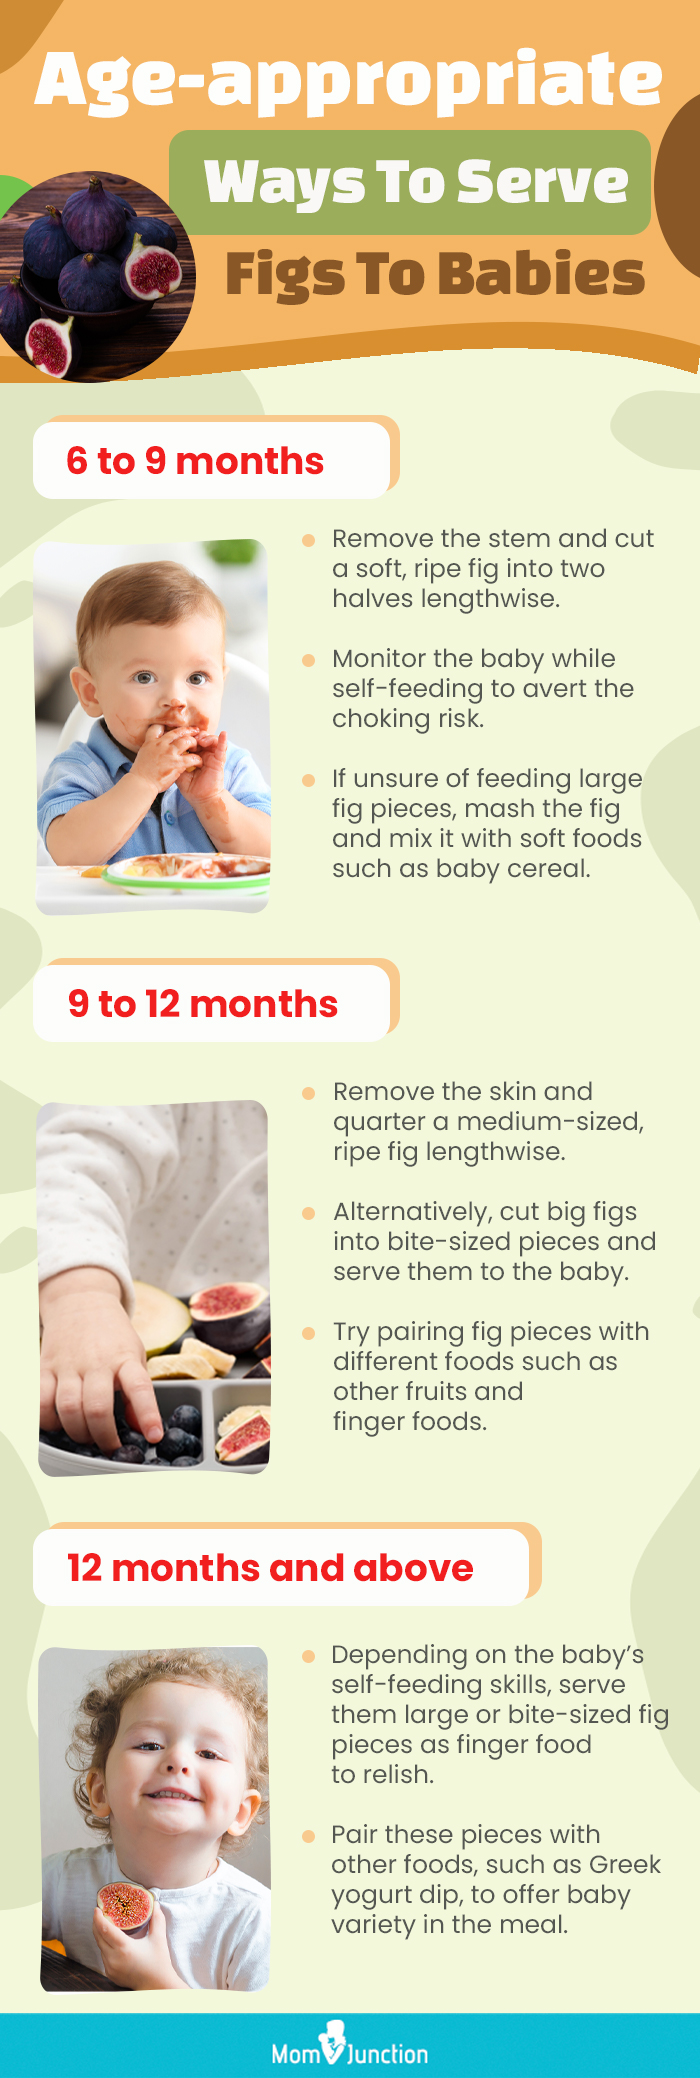 age appropriate ways to serve figs to babies [infographic]